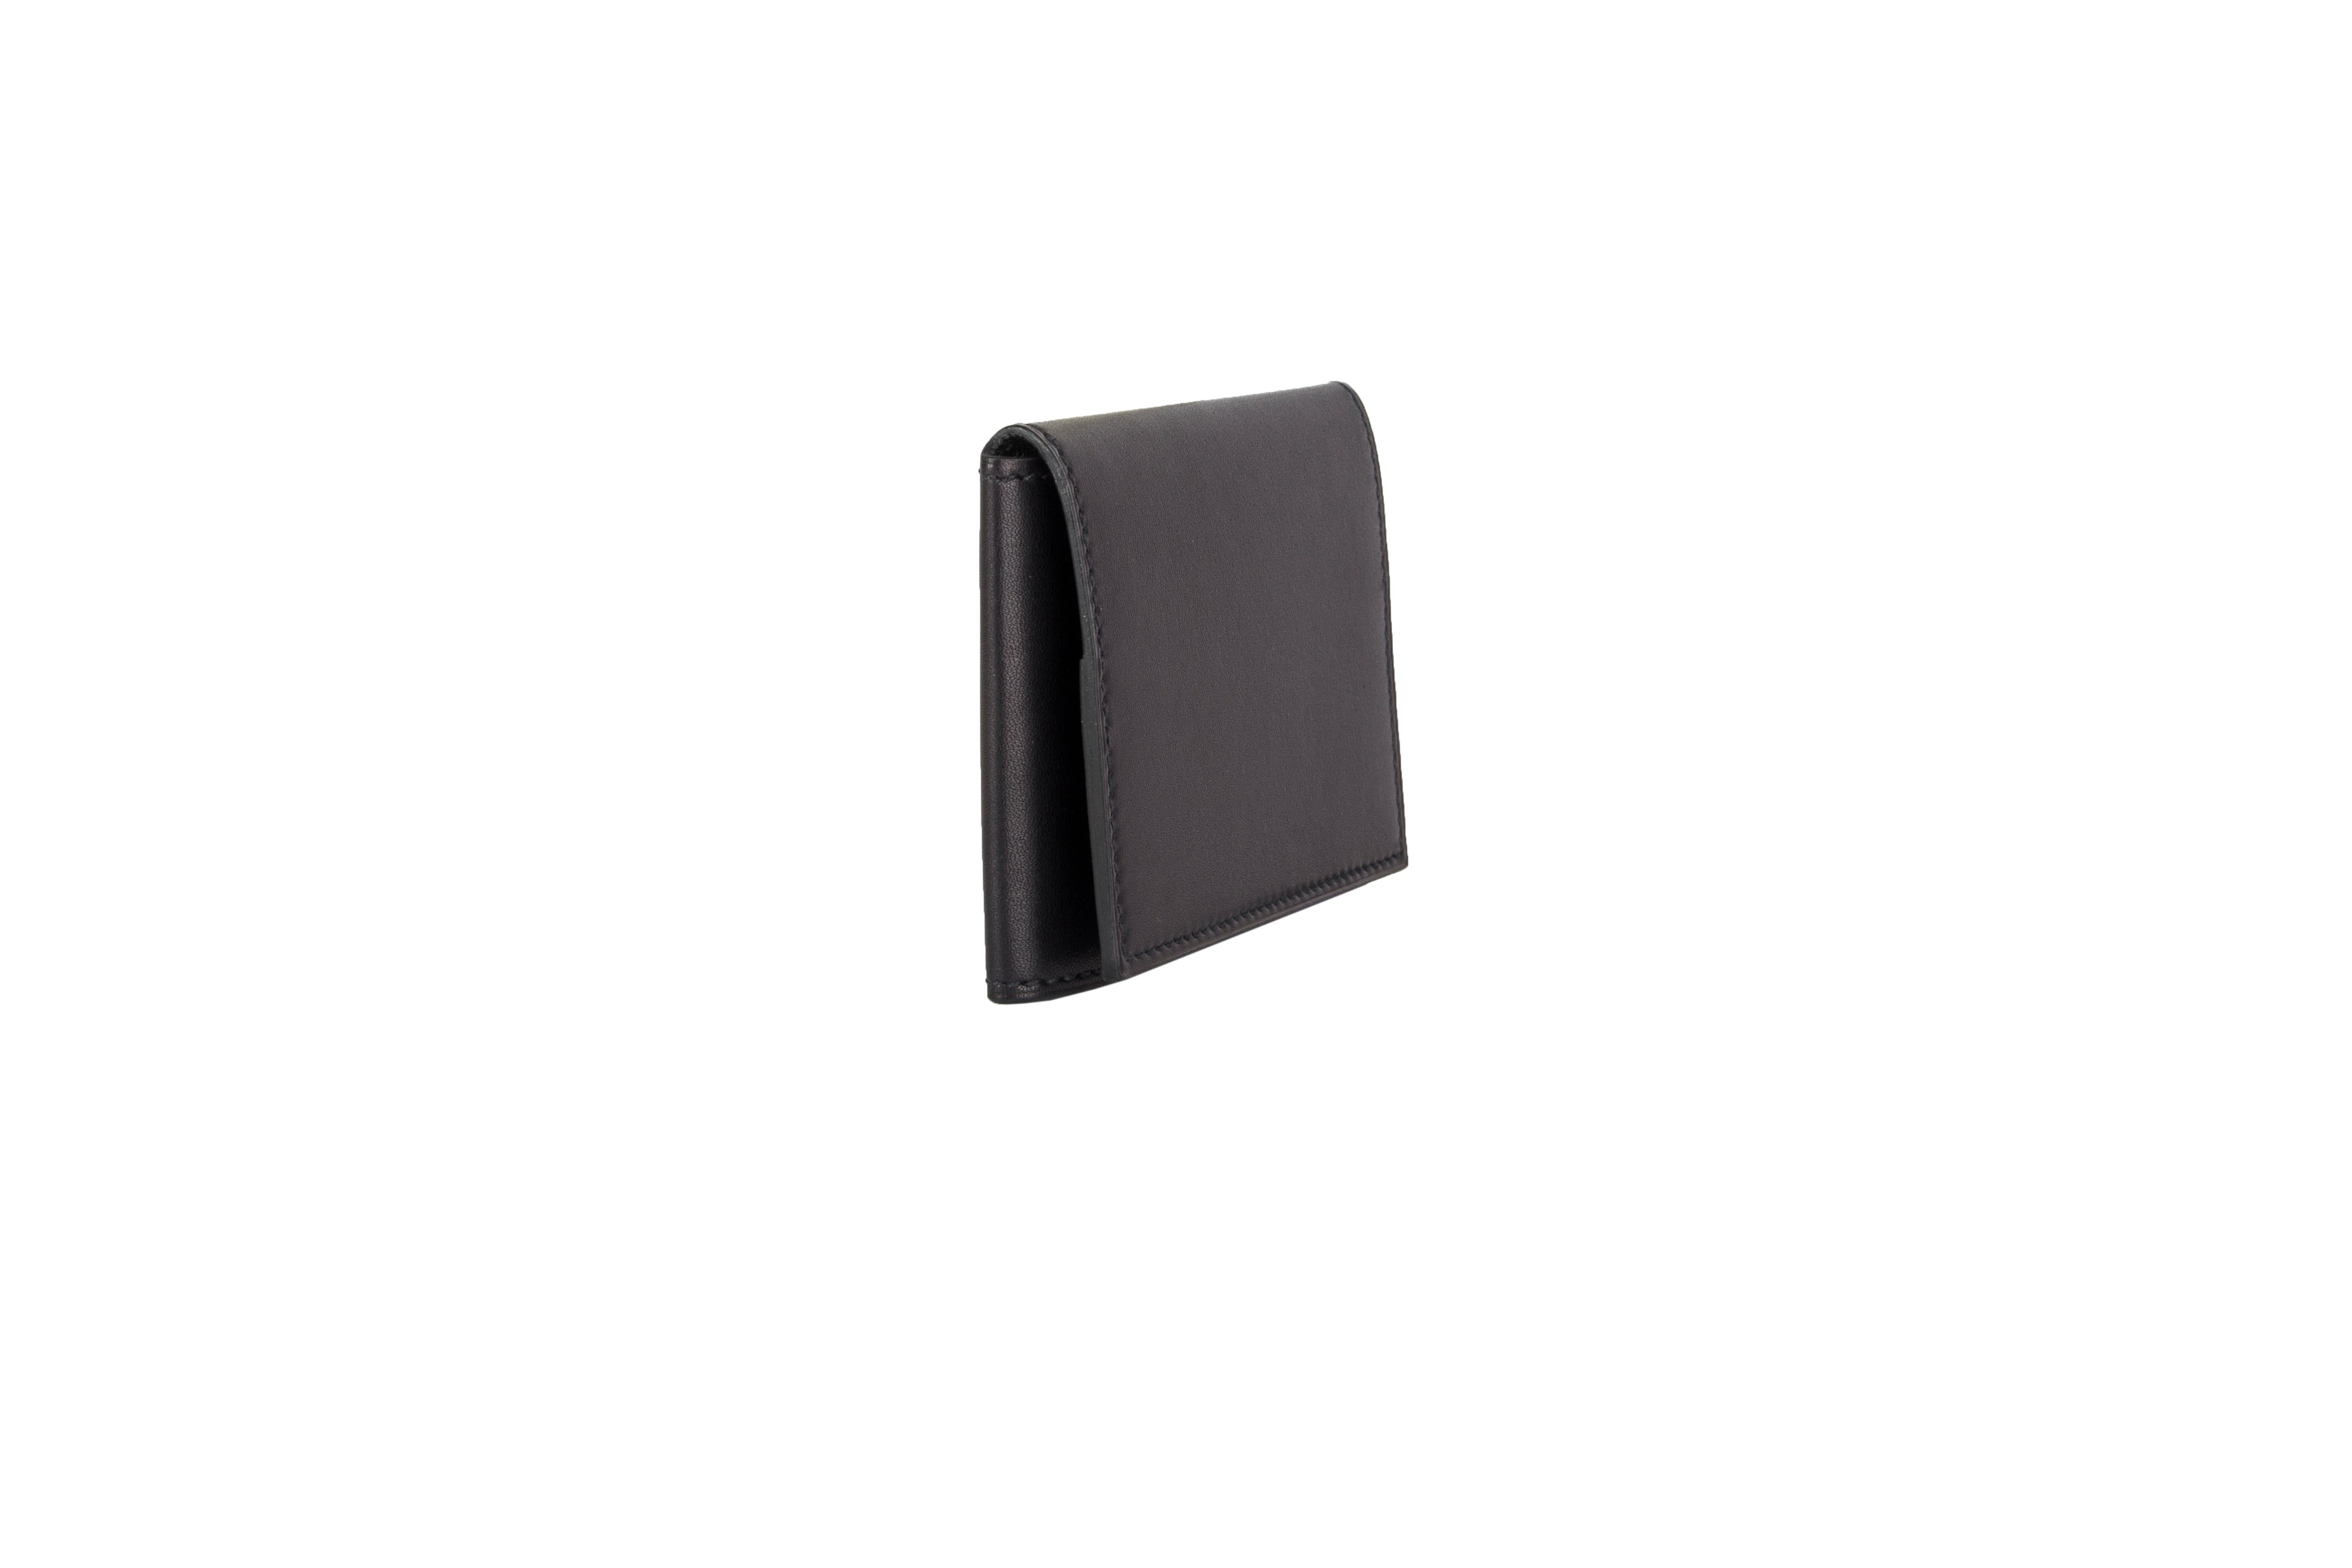 Hermes 'Guernsey' tri-fold credit card wallet in black Veau Eversoft leather. Brand new. Comes with box. 

Width 9cm (3.5in)
Height 6cm (2.3in)
